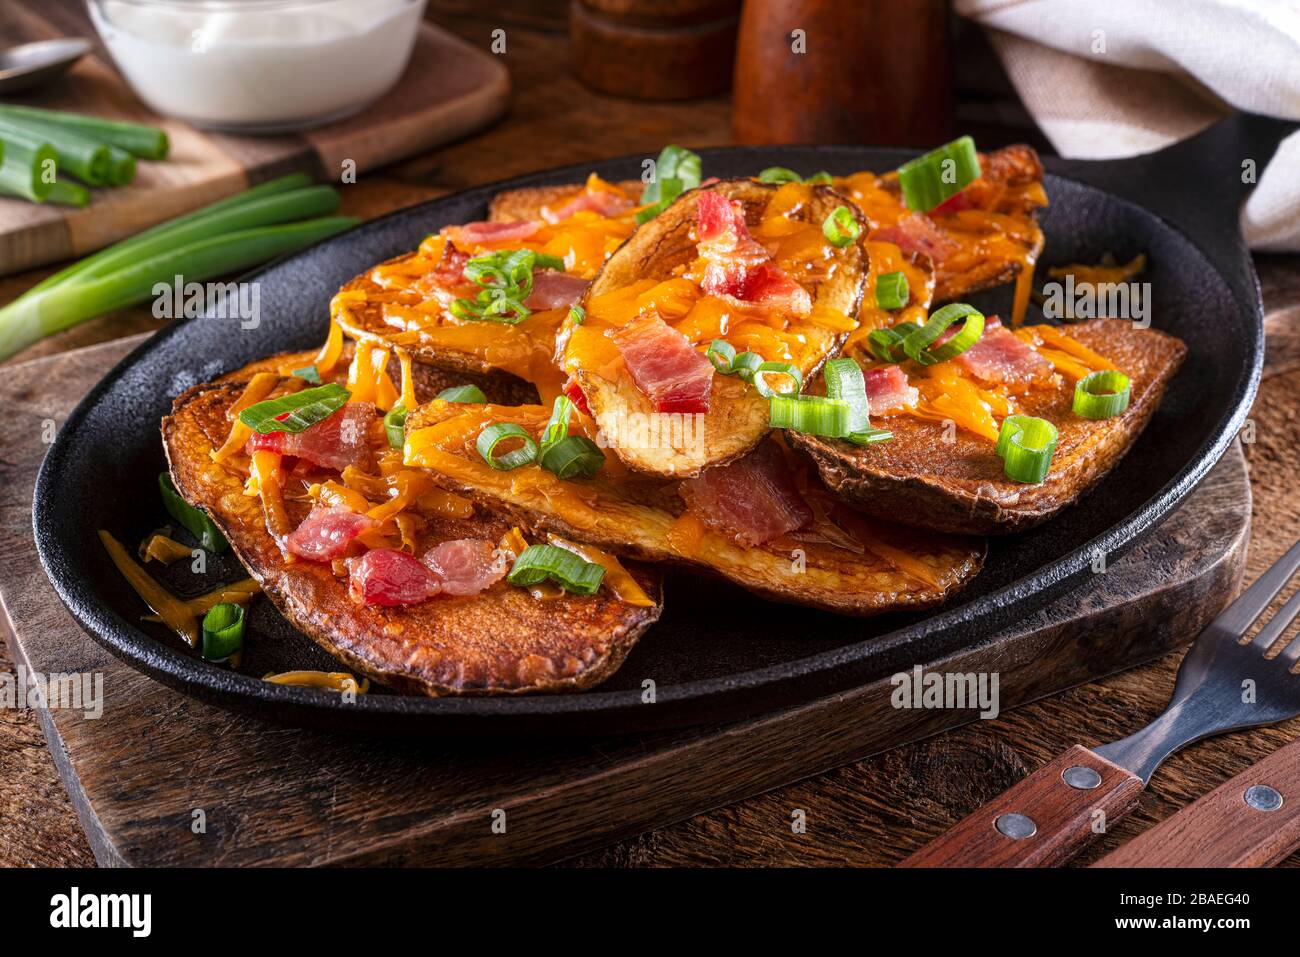 Delicious homemade potato skins with melted cheese, bacon, green onions and sour cream. Stock Photo